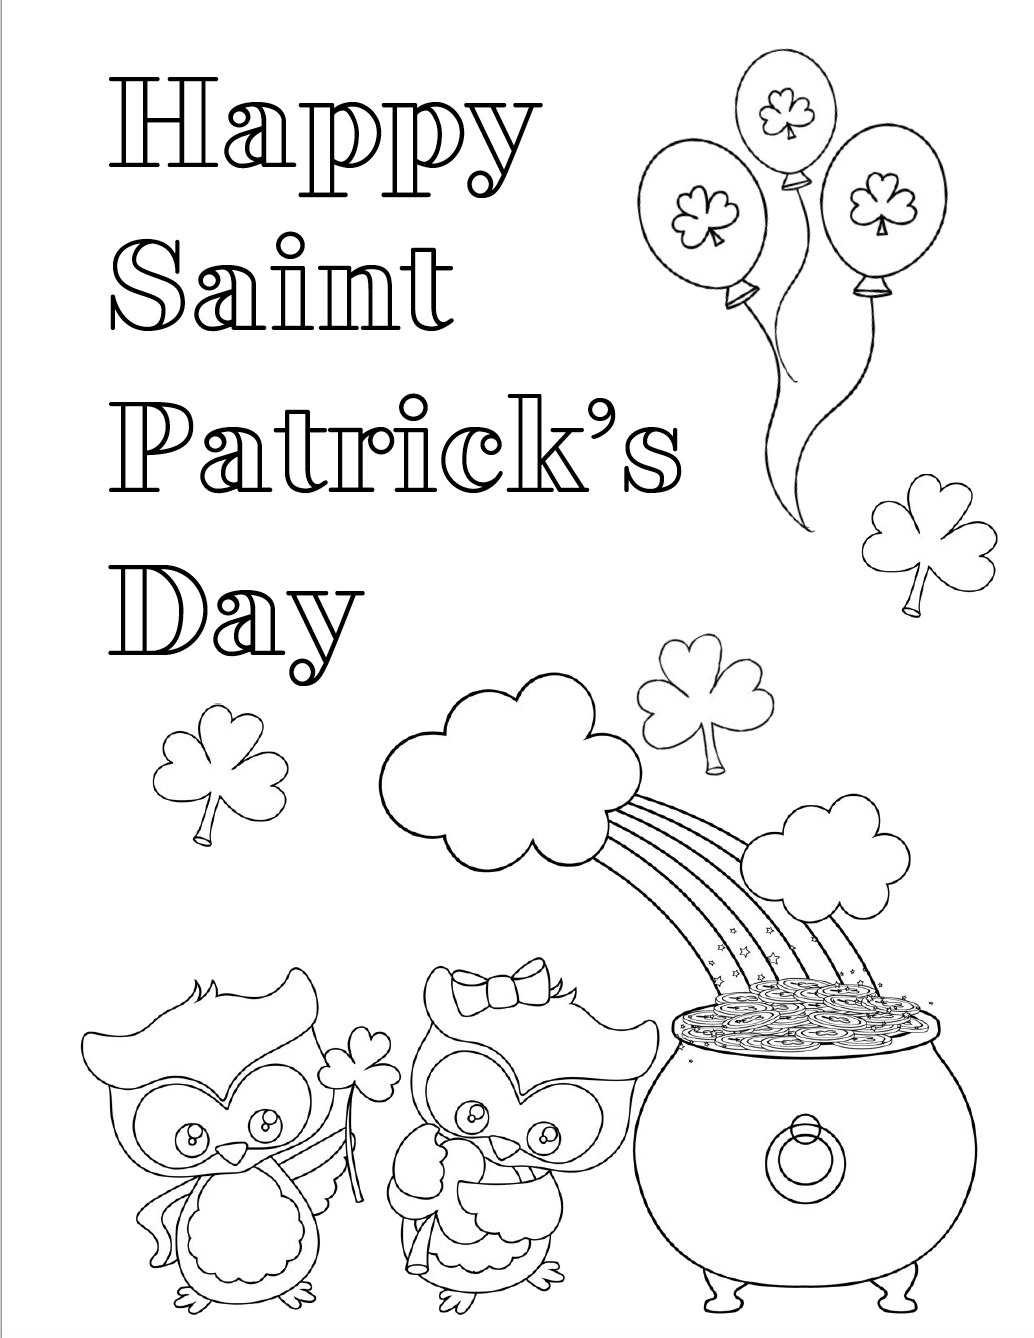 St. Patrick&rsquo;s Day Coloring Page